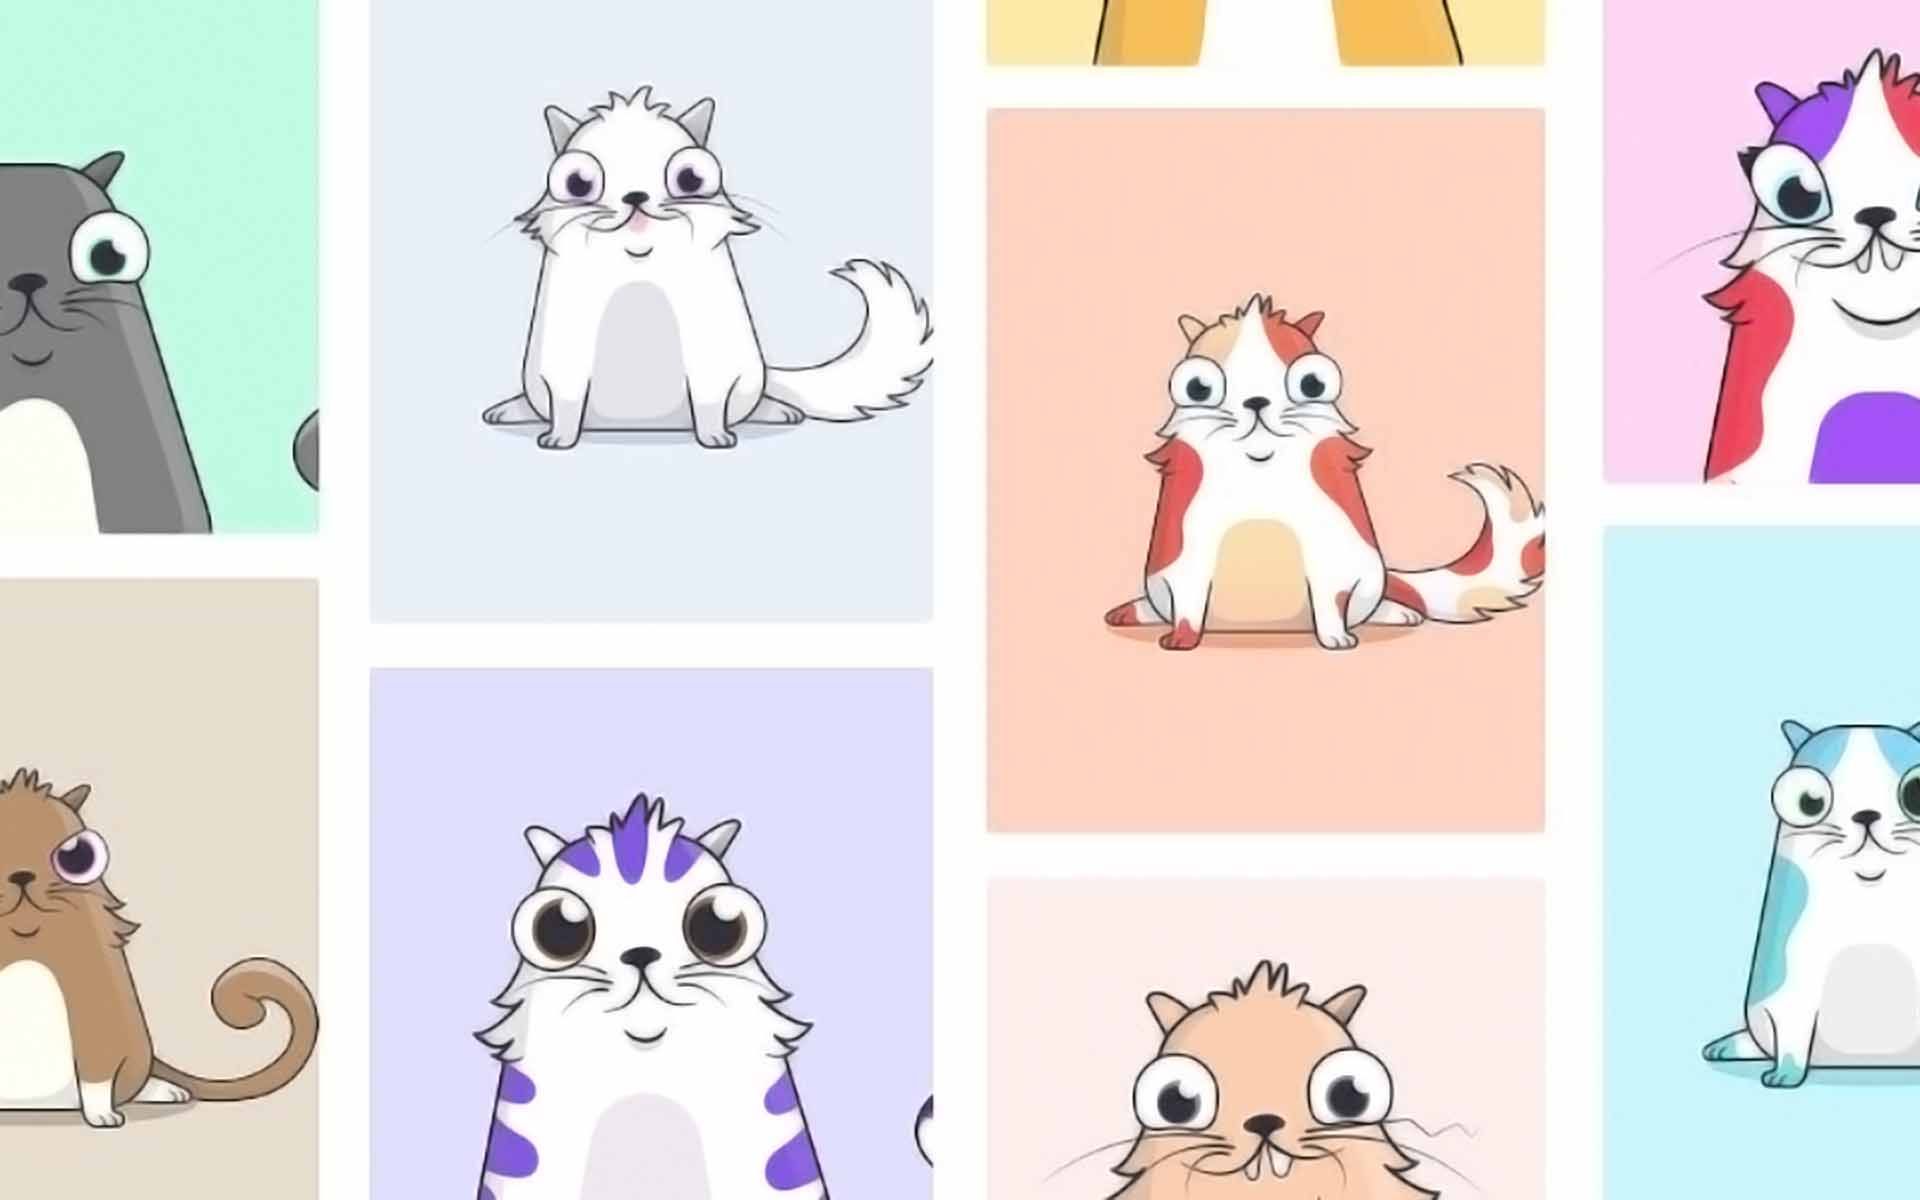 featured image - CryptoKitties: A Marketing Love Letter